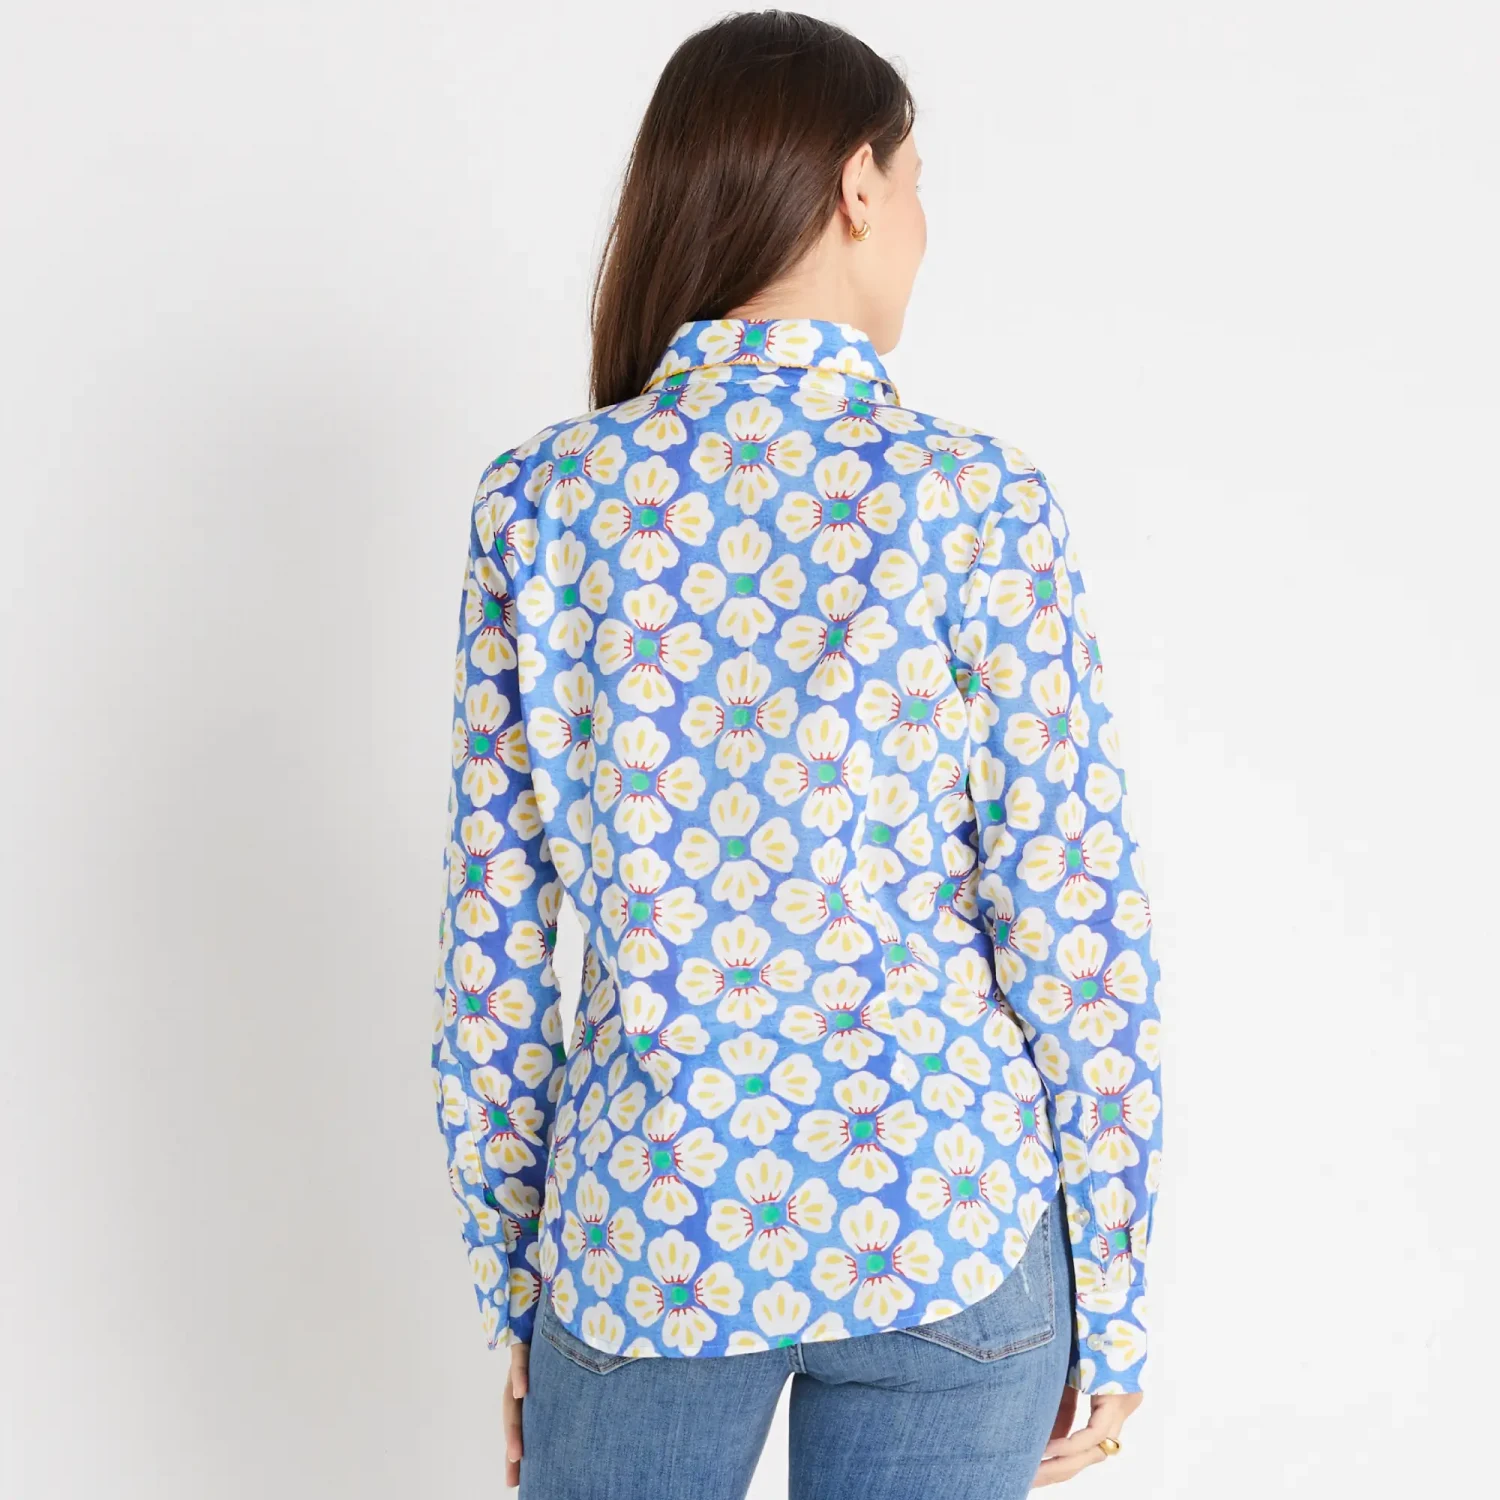 De Loreta brand contemporary and stylish maternity friendly button down printed floral shirts